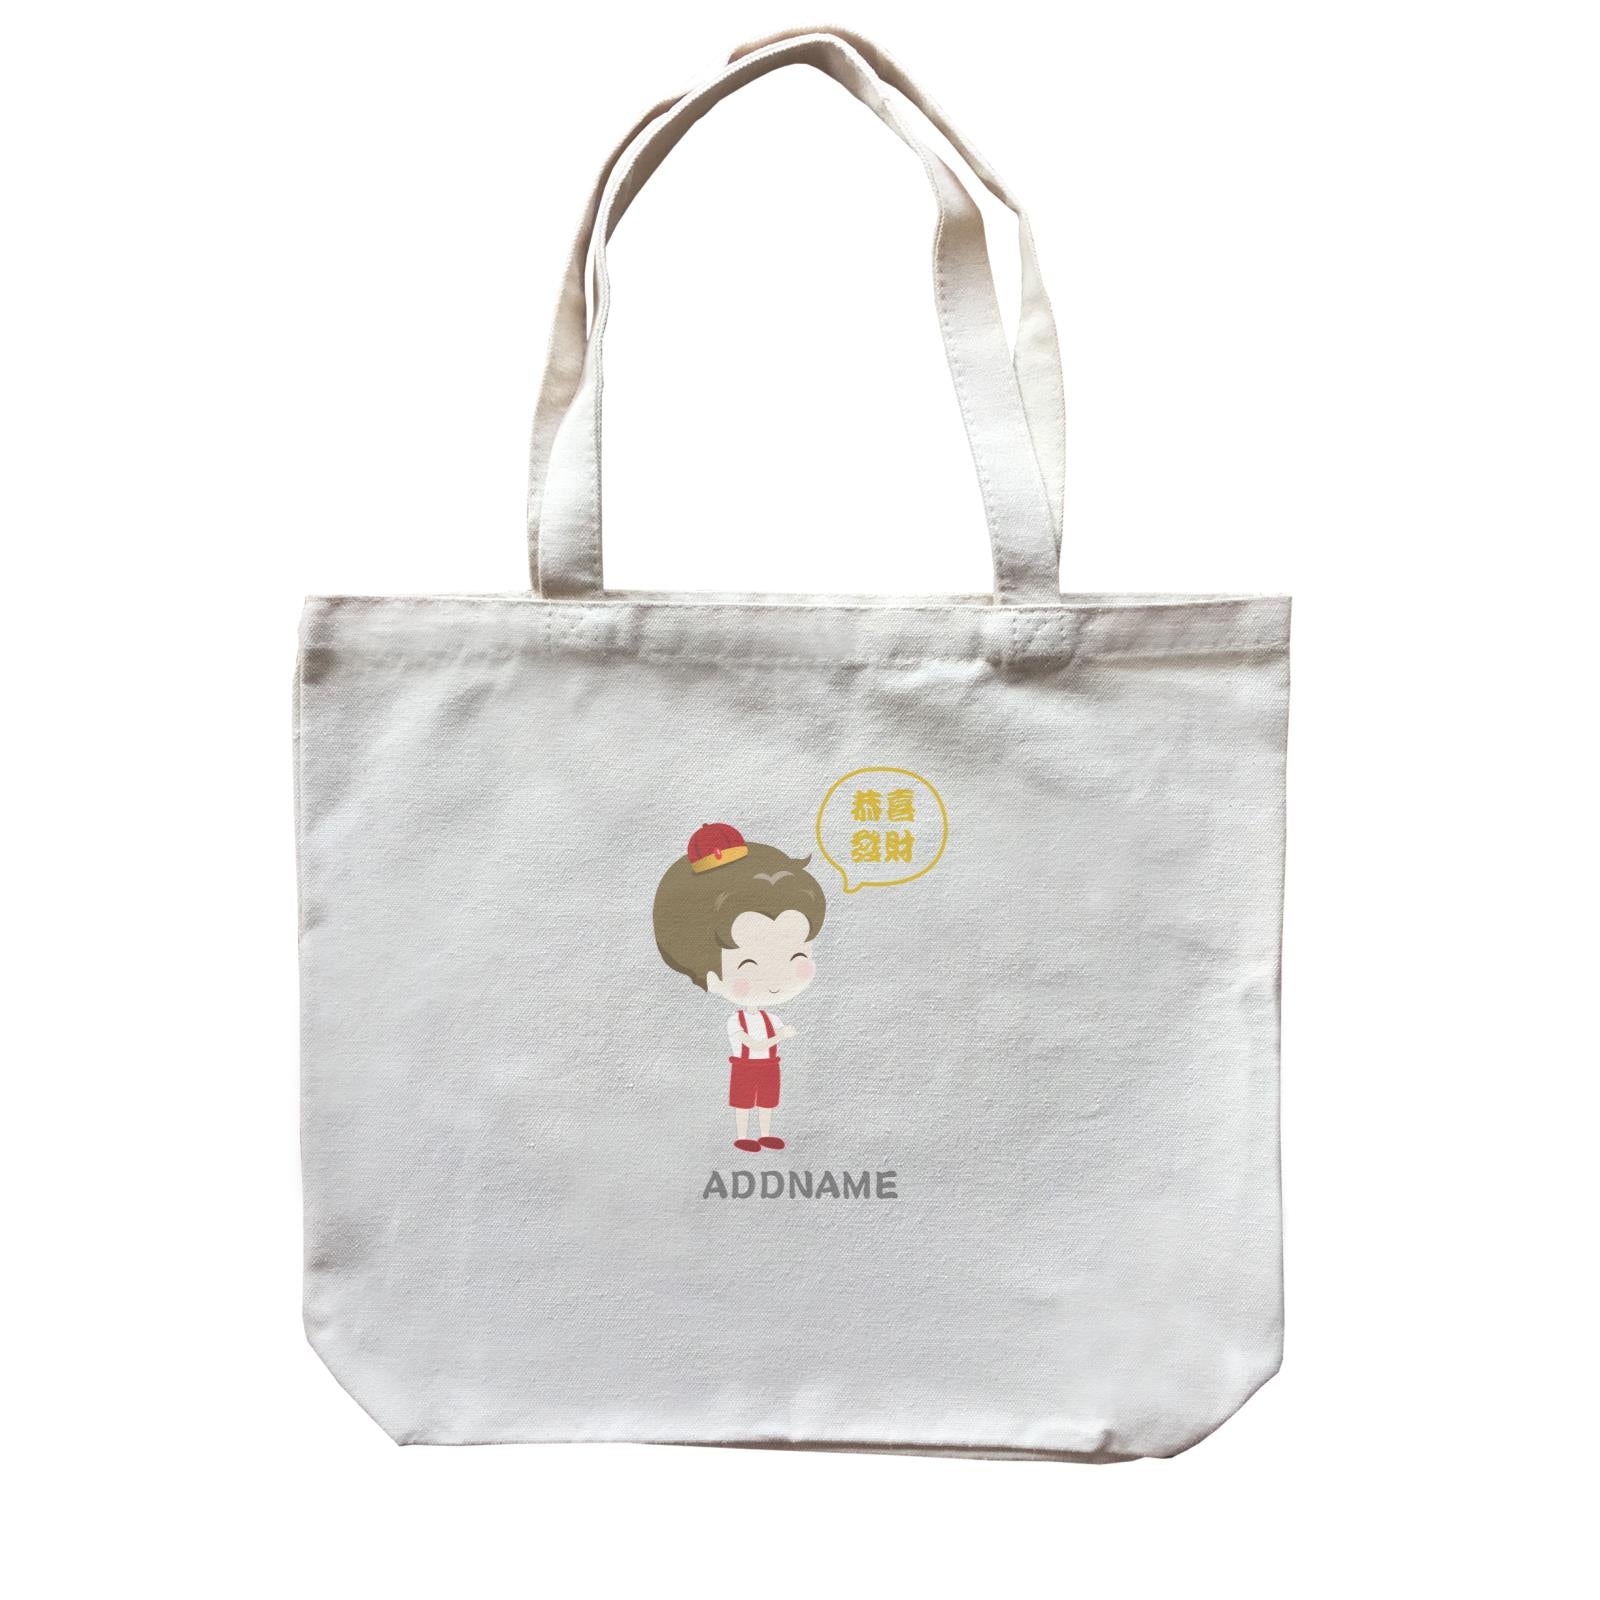 Chinese New Year Family Gong Xi Fai Cai Boy Addname Canvas Bag